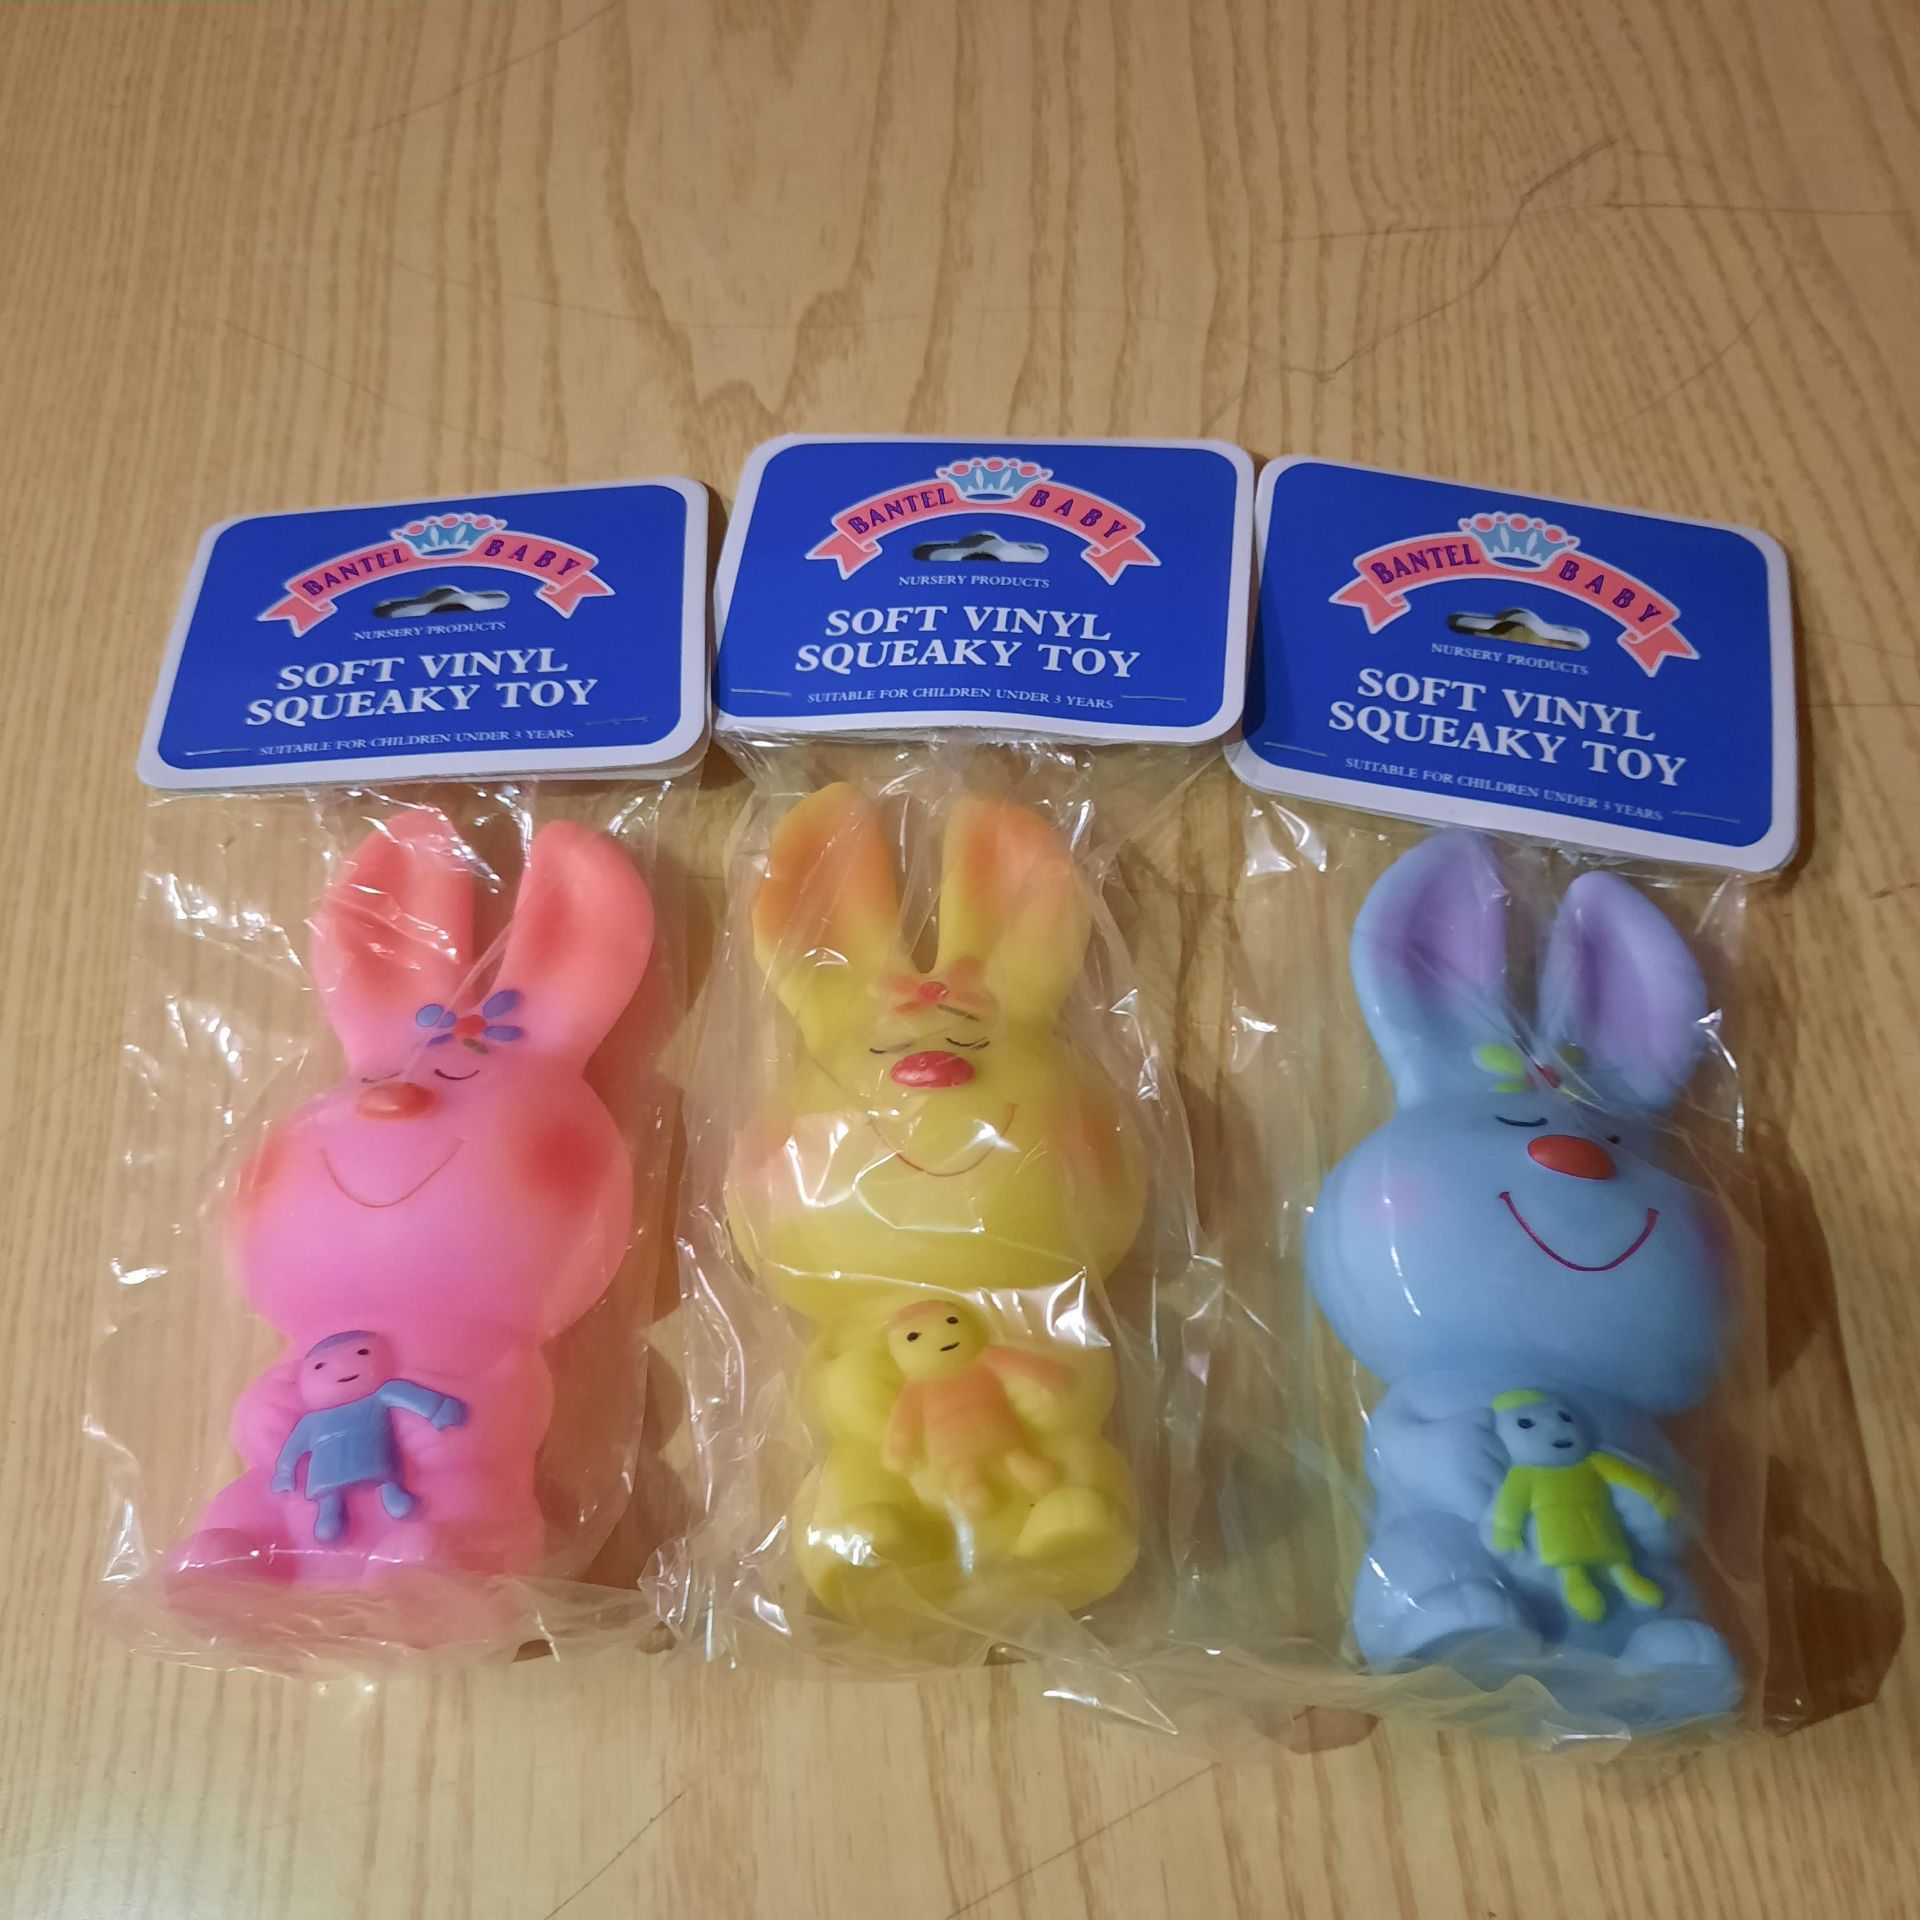 X 12 BRAND NEW AND INDIVIDUALLY PACKAGED SOFT VINYL SQUEACKY TOY.